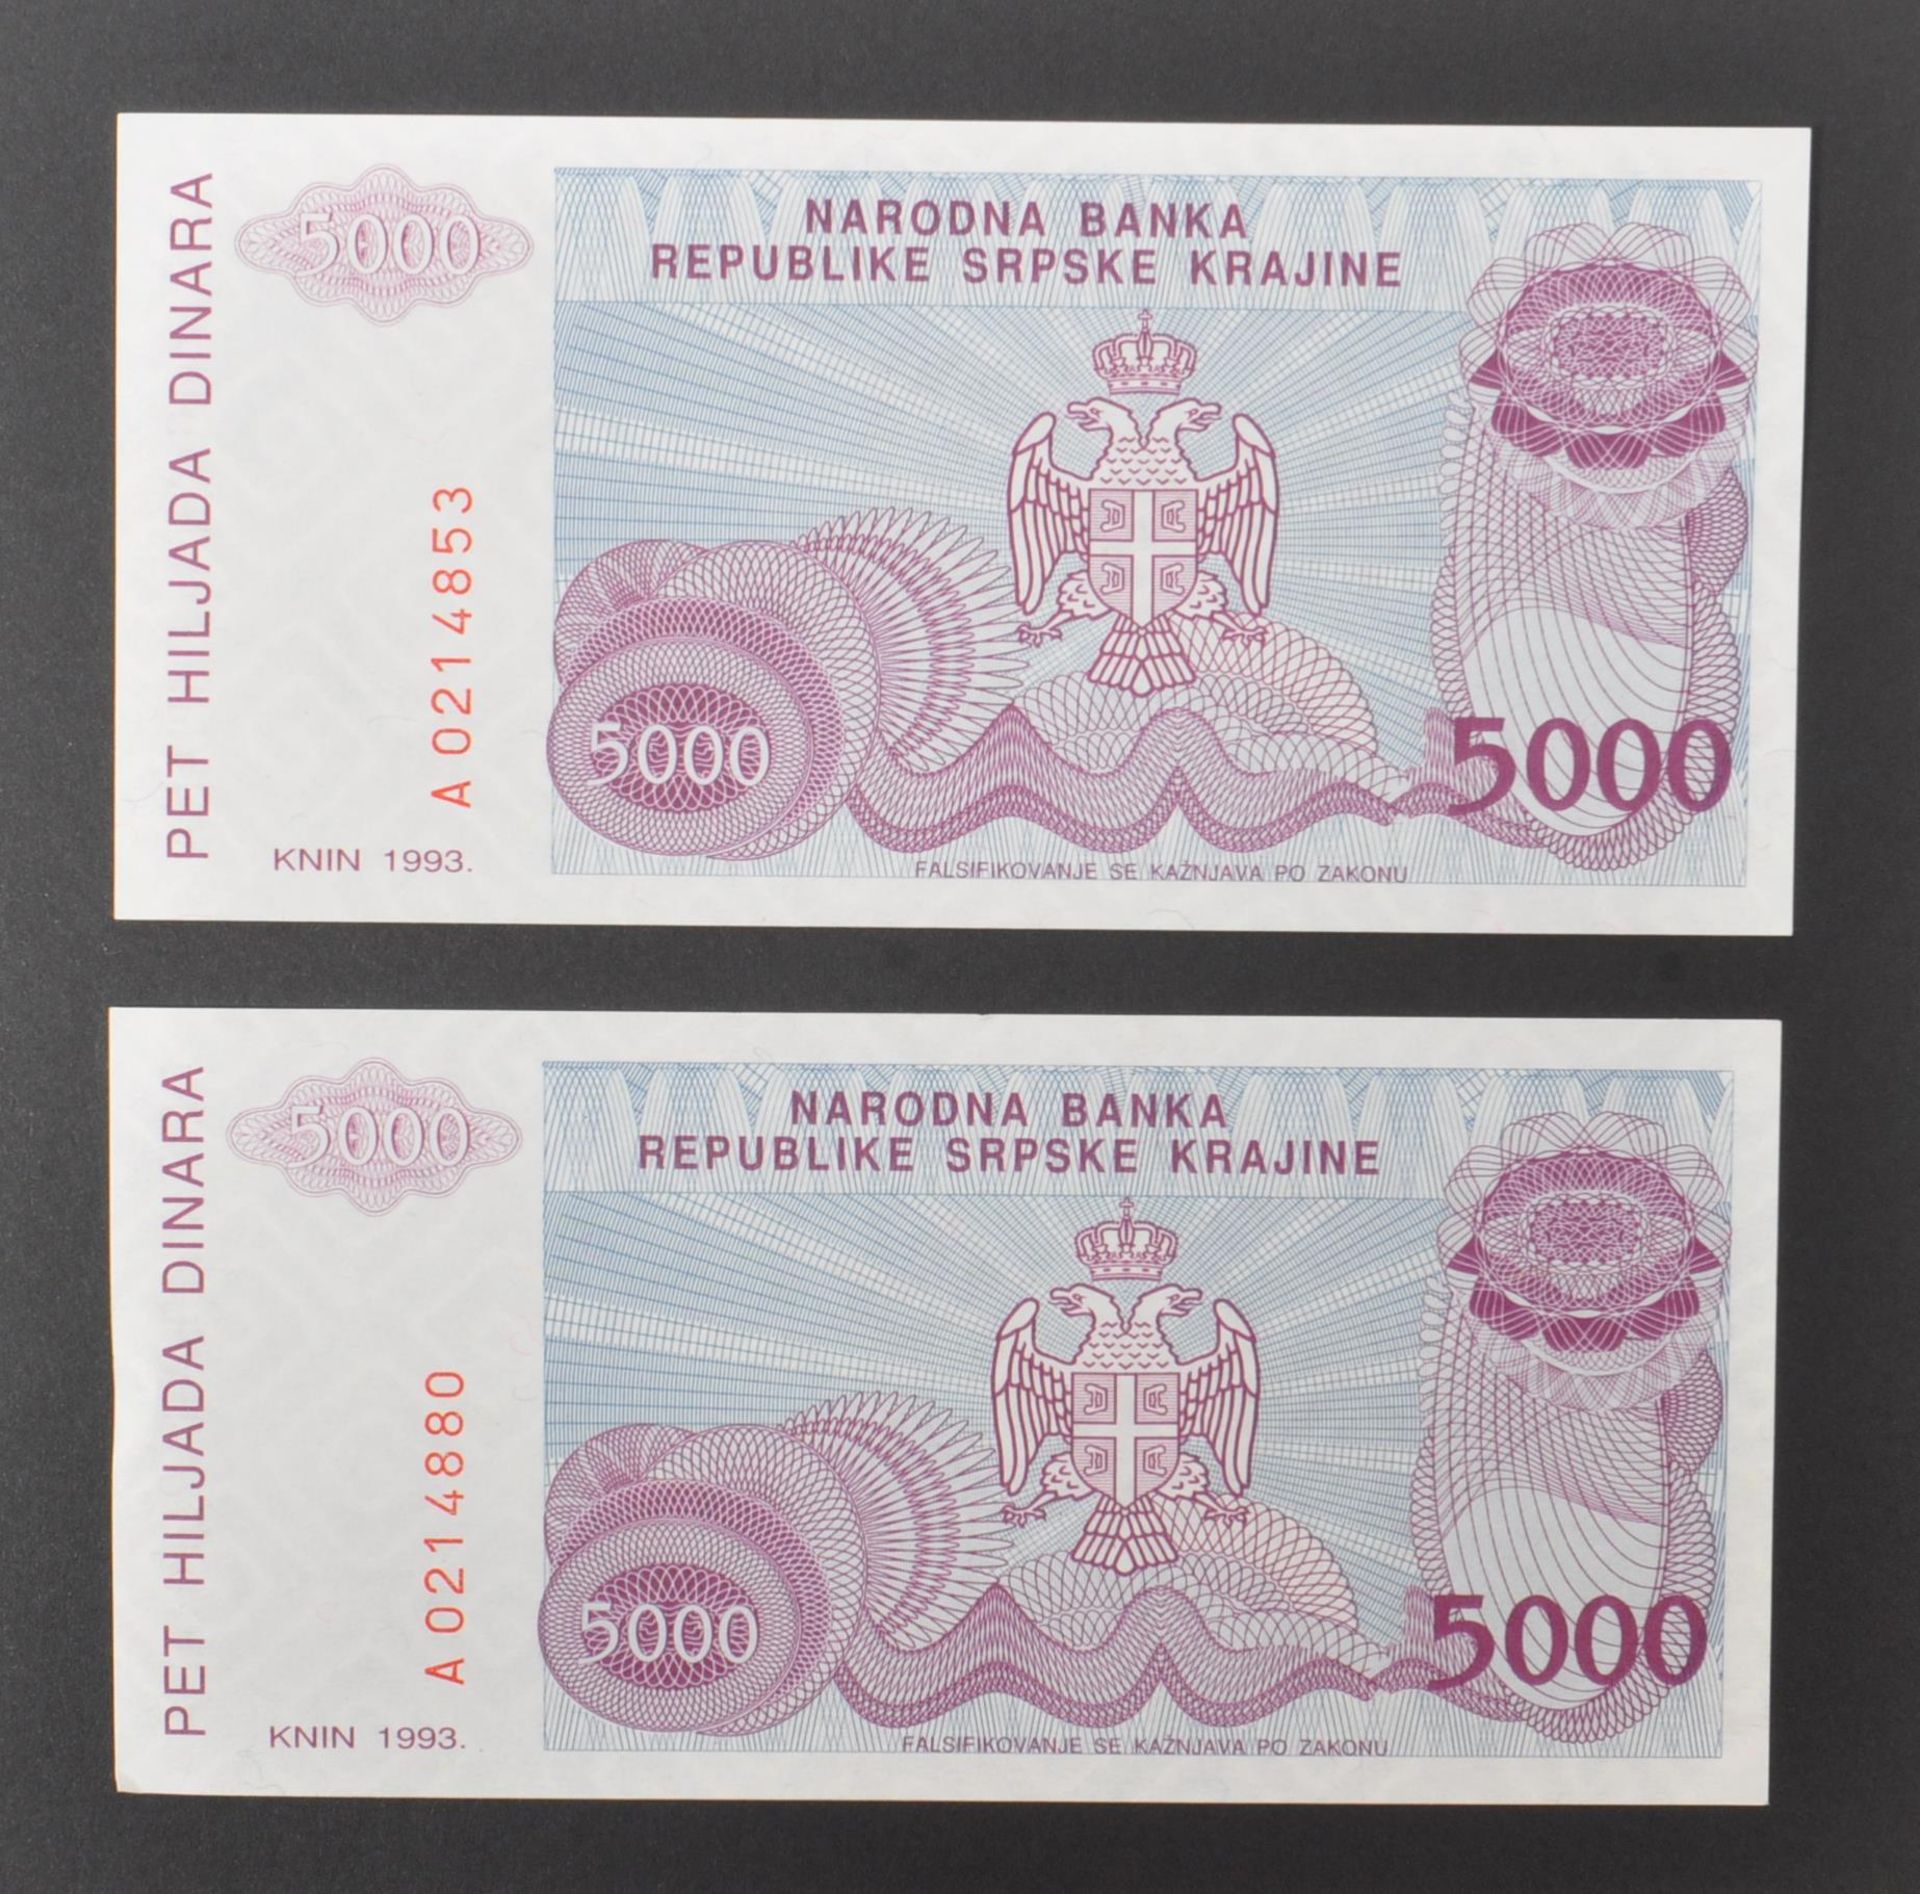 INTERNATIONAL MOSTLY UNCIRCULATED BANK NOTES - EUROPE - Image 23 of 30